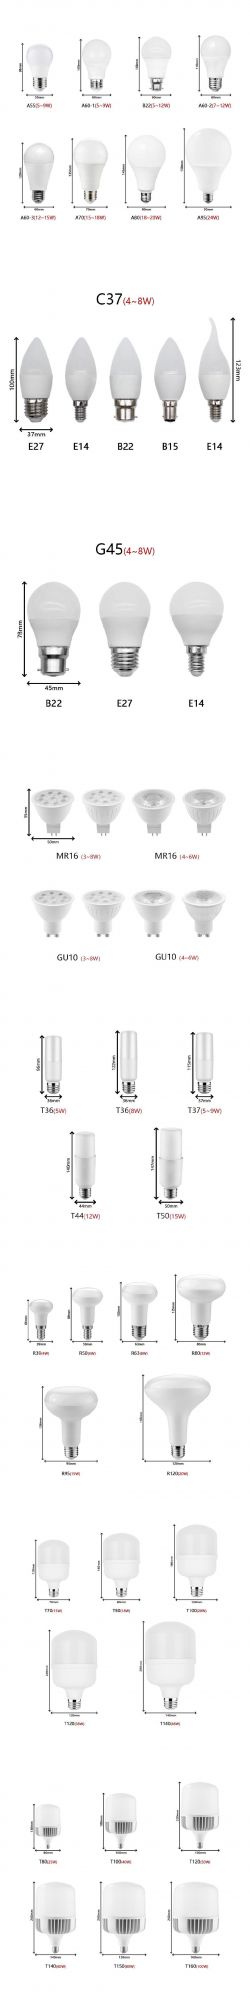 Chinese Supplier Factory Price LED Bulb Light GU10 MR16 3W 4W 5W 6W 7W LED Spotlight for Home Office Lighting with CE RoHS ERP Approved 2 Years Warranty